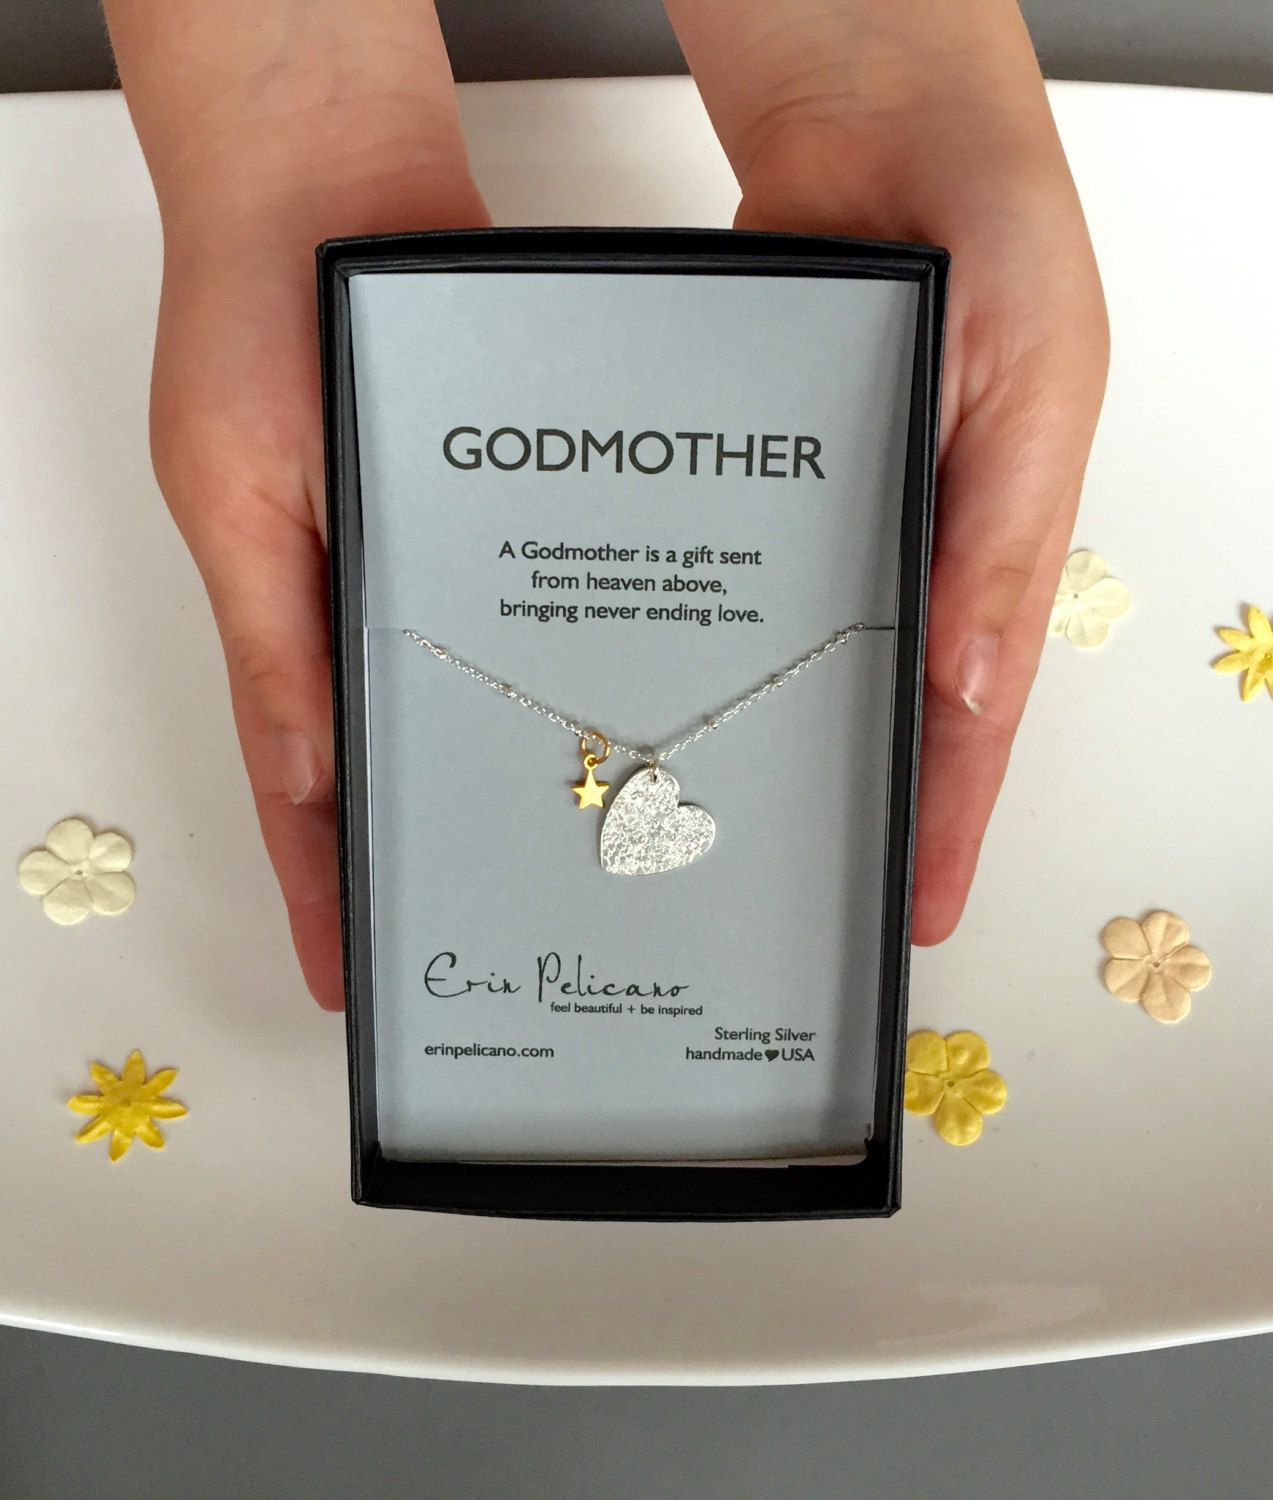 Christening Gift Ideas From Godmother
 Godmother Necklace Godmother Gift Baptism Christening